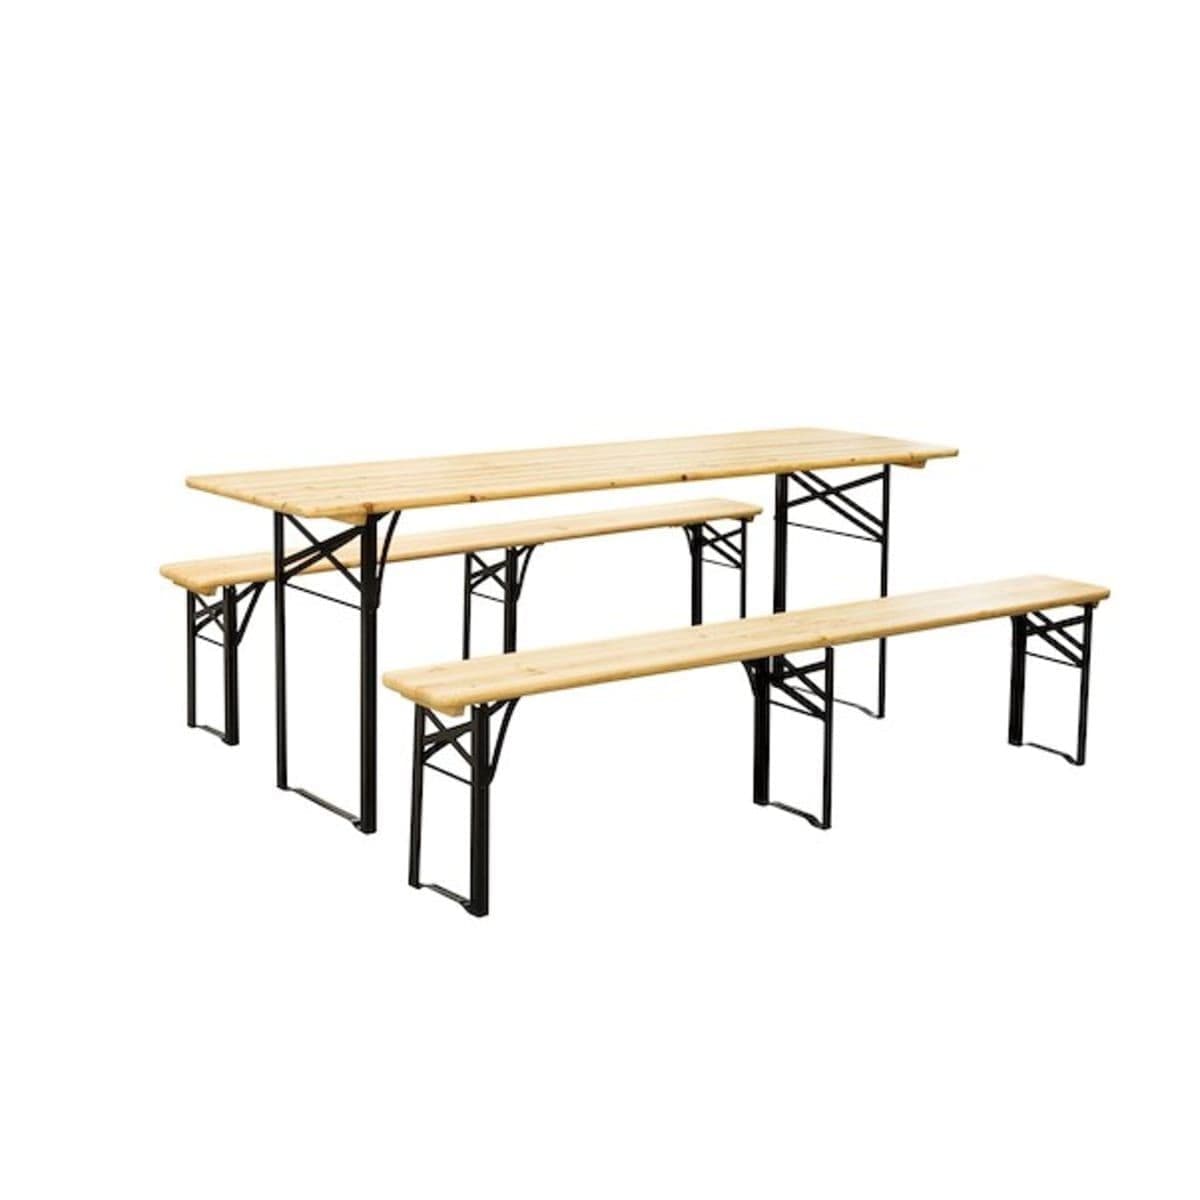 FIRA SET 8 Seats table 187X60cm and 2 benches in pine and steel